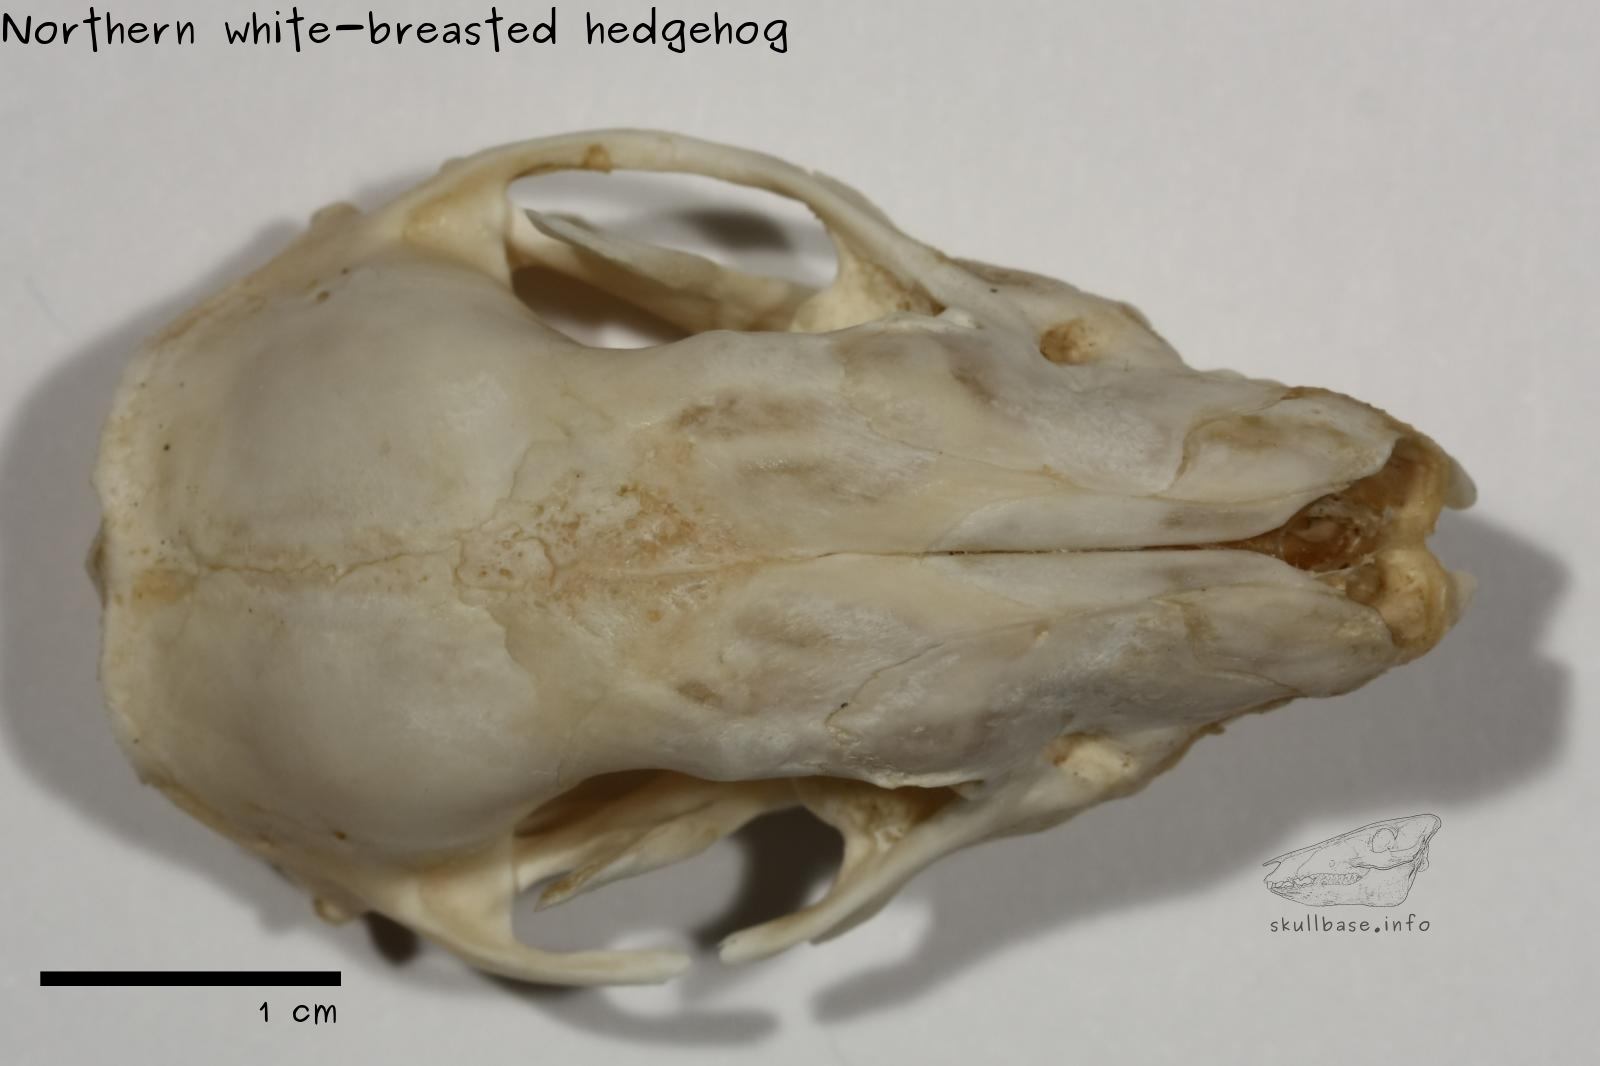 Northern white-breasted hedgehog (Erinaceus roumanicus) skull dorsal view